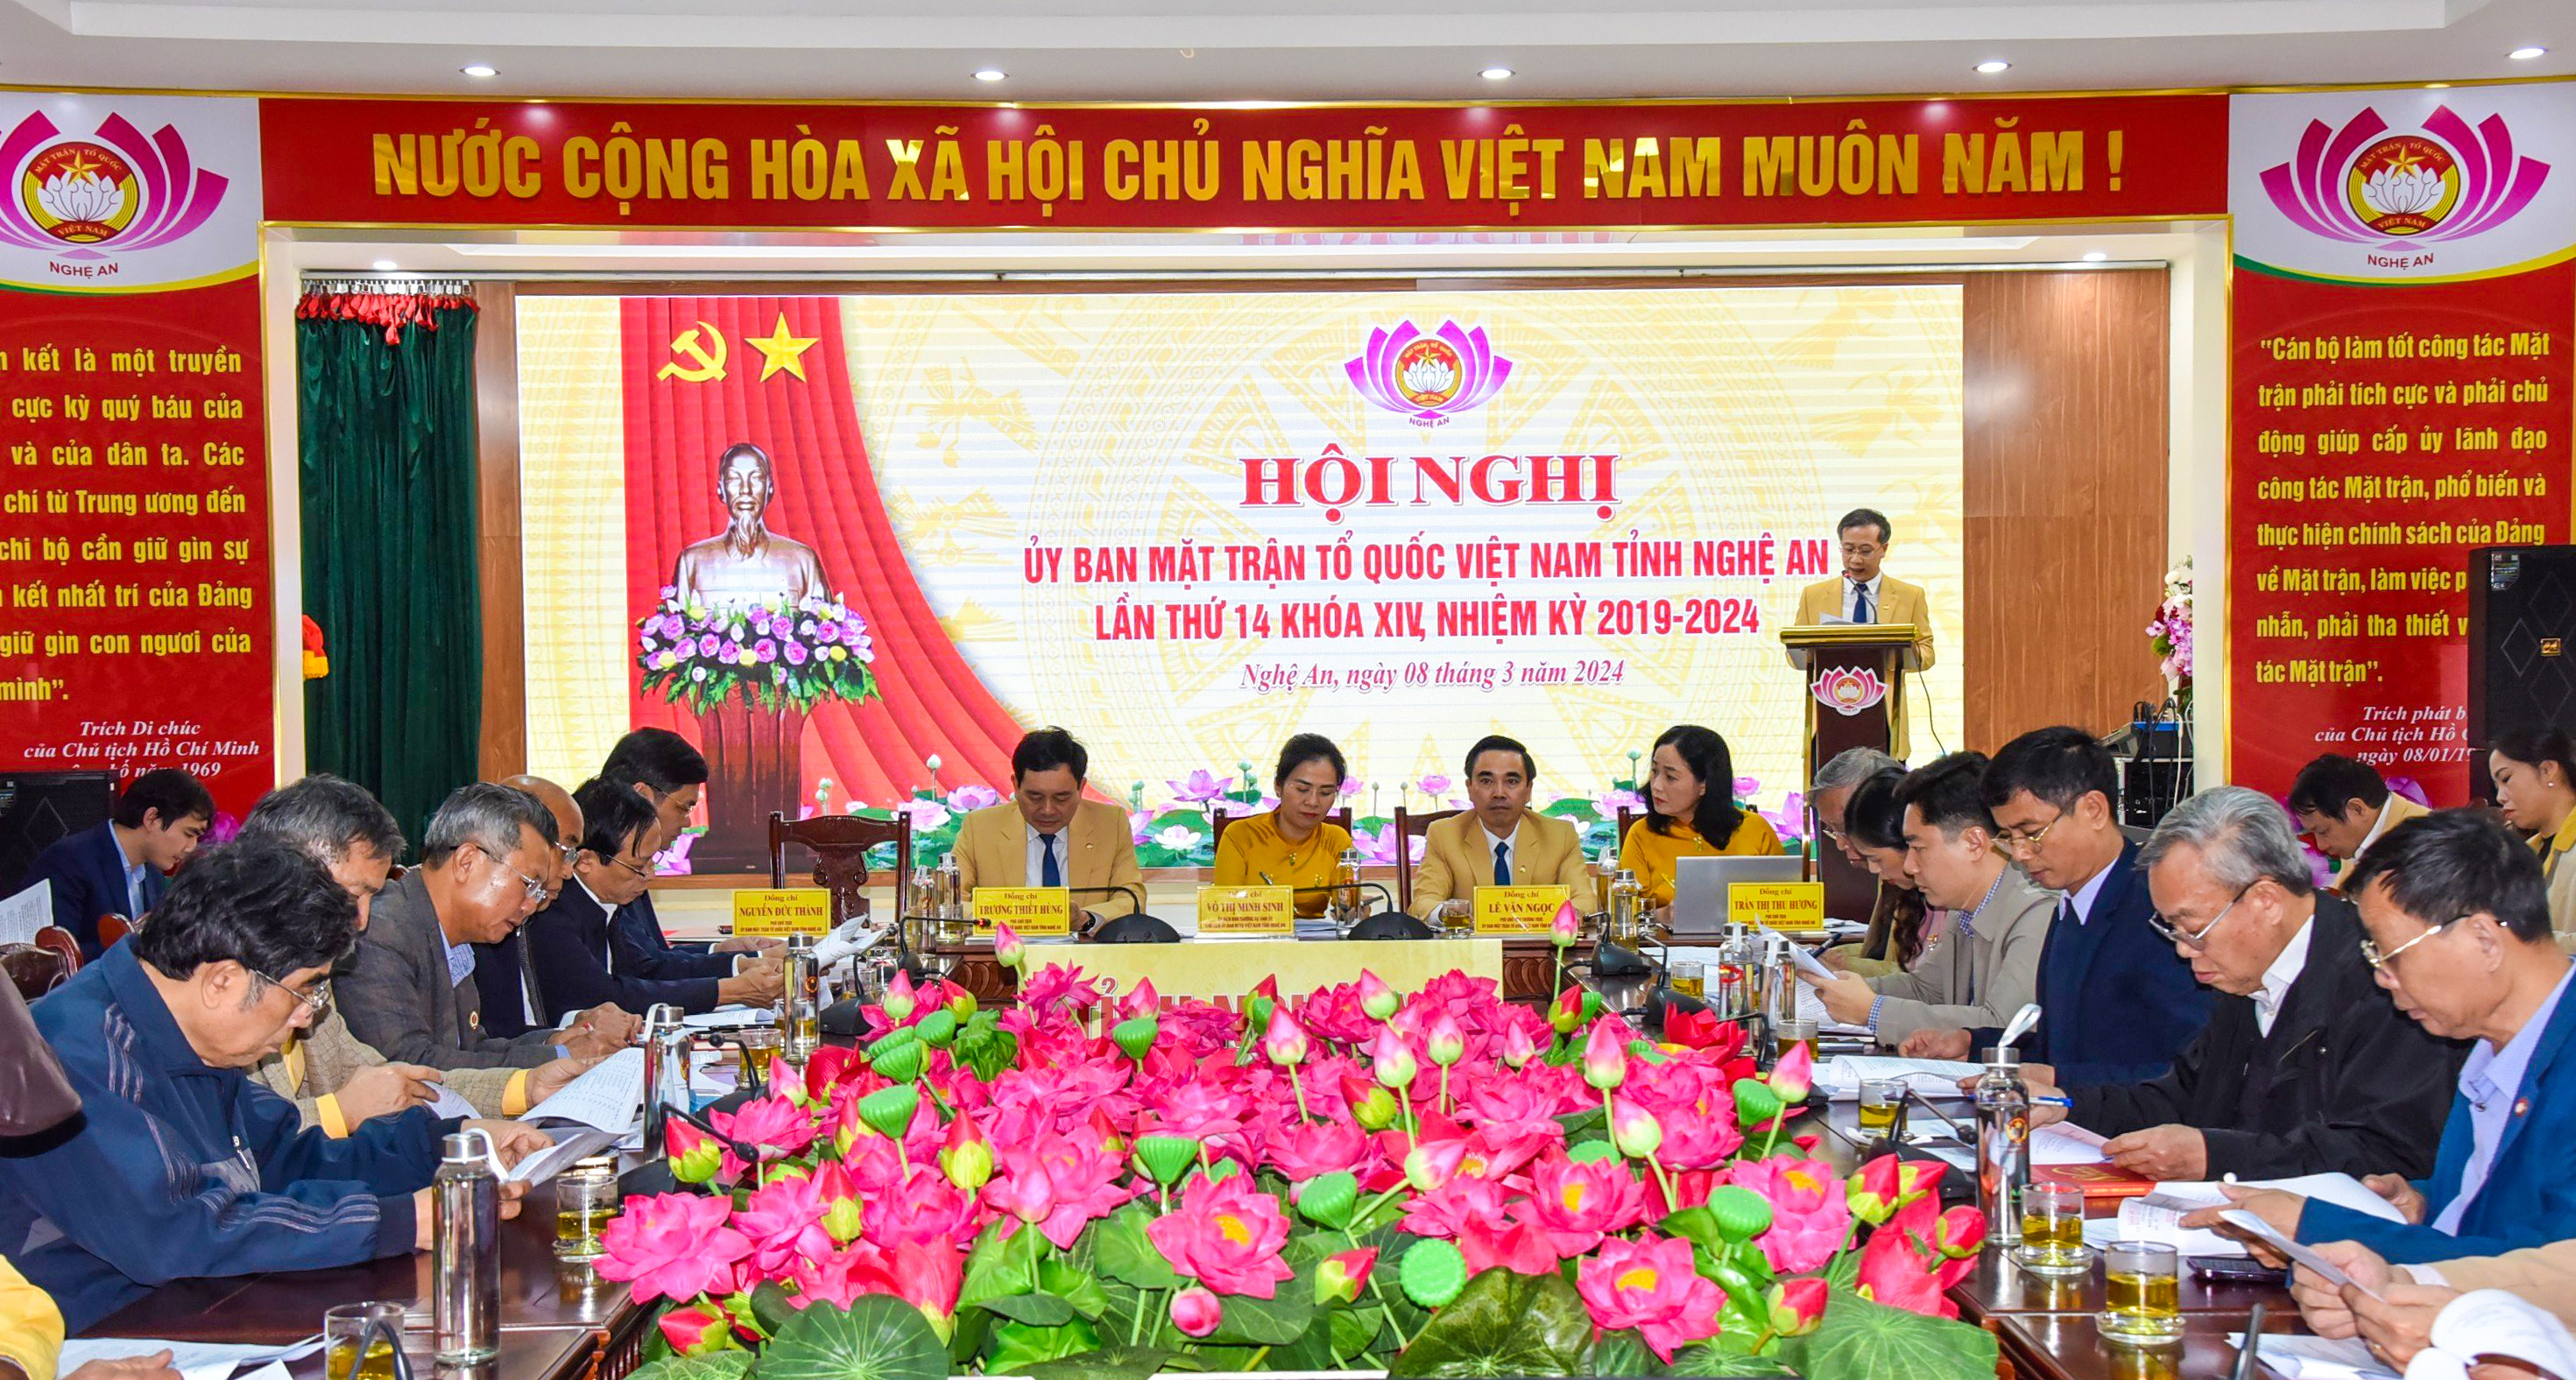 bna-toan-canh-hoi-nghi-thanh-le-6142.jpg